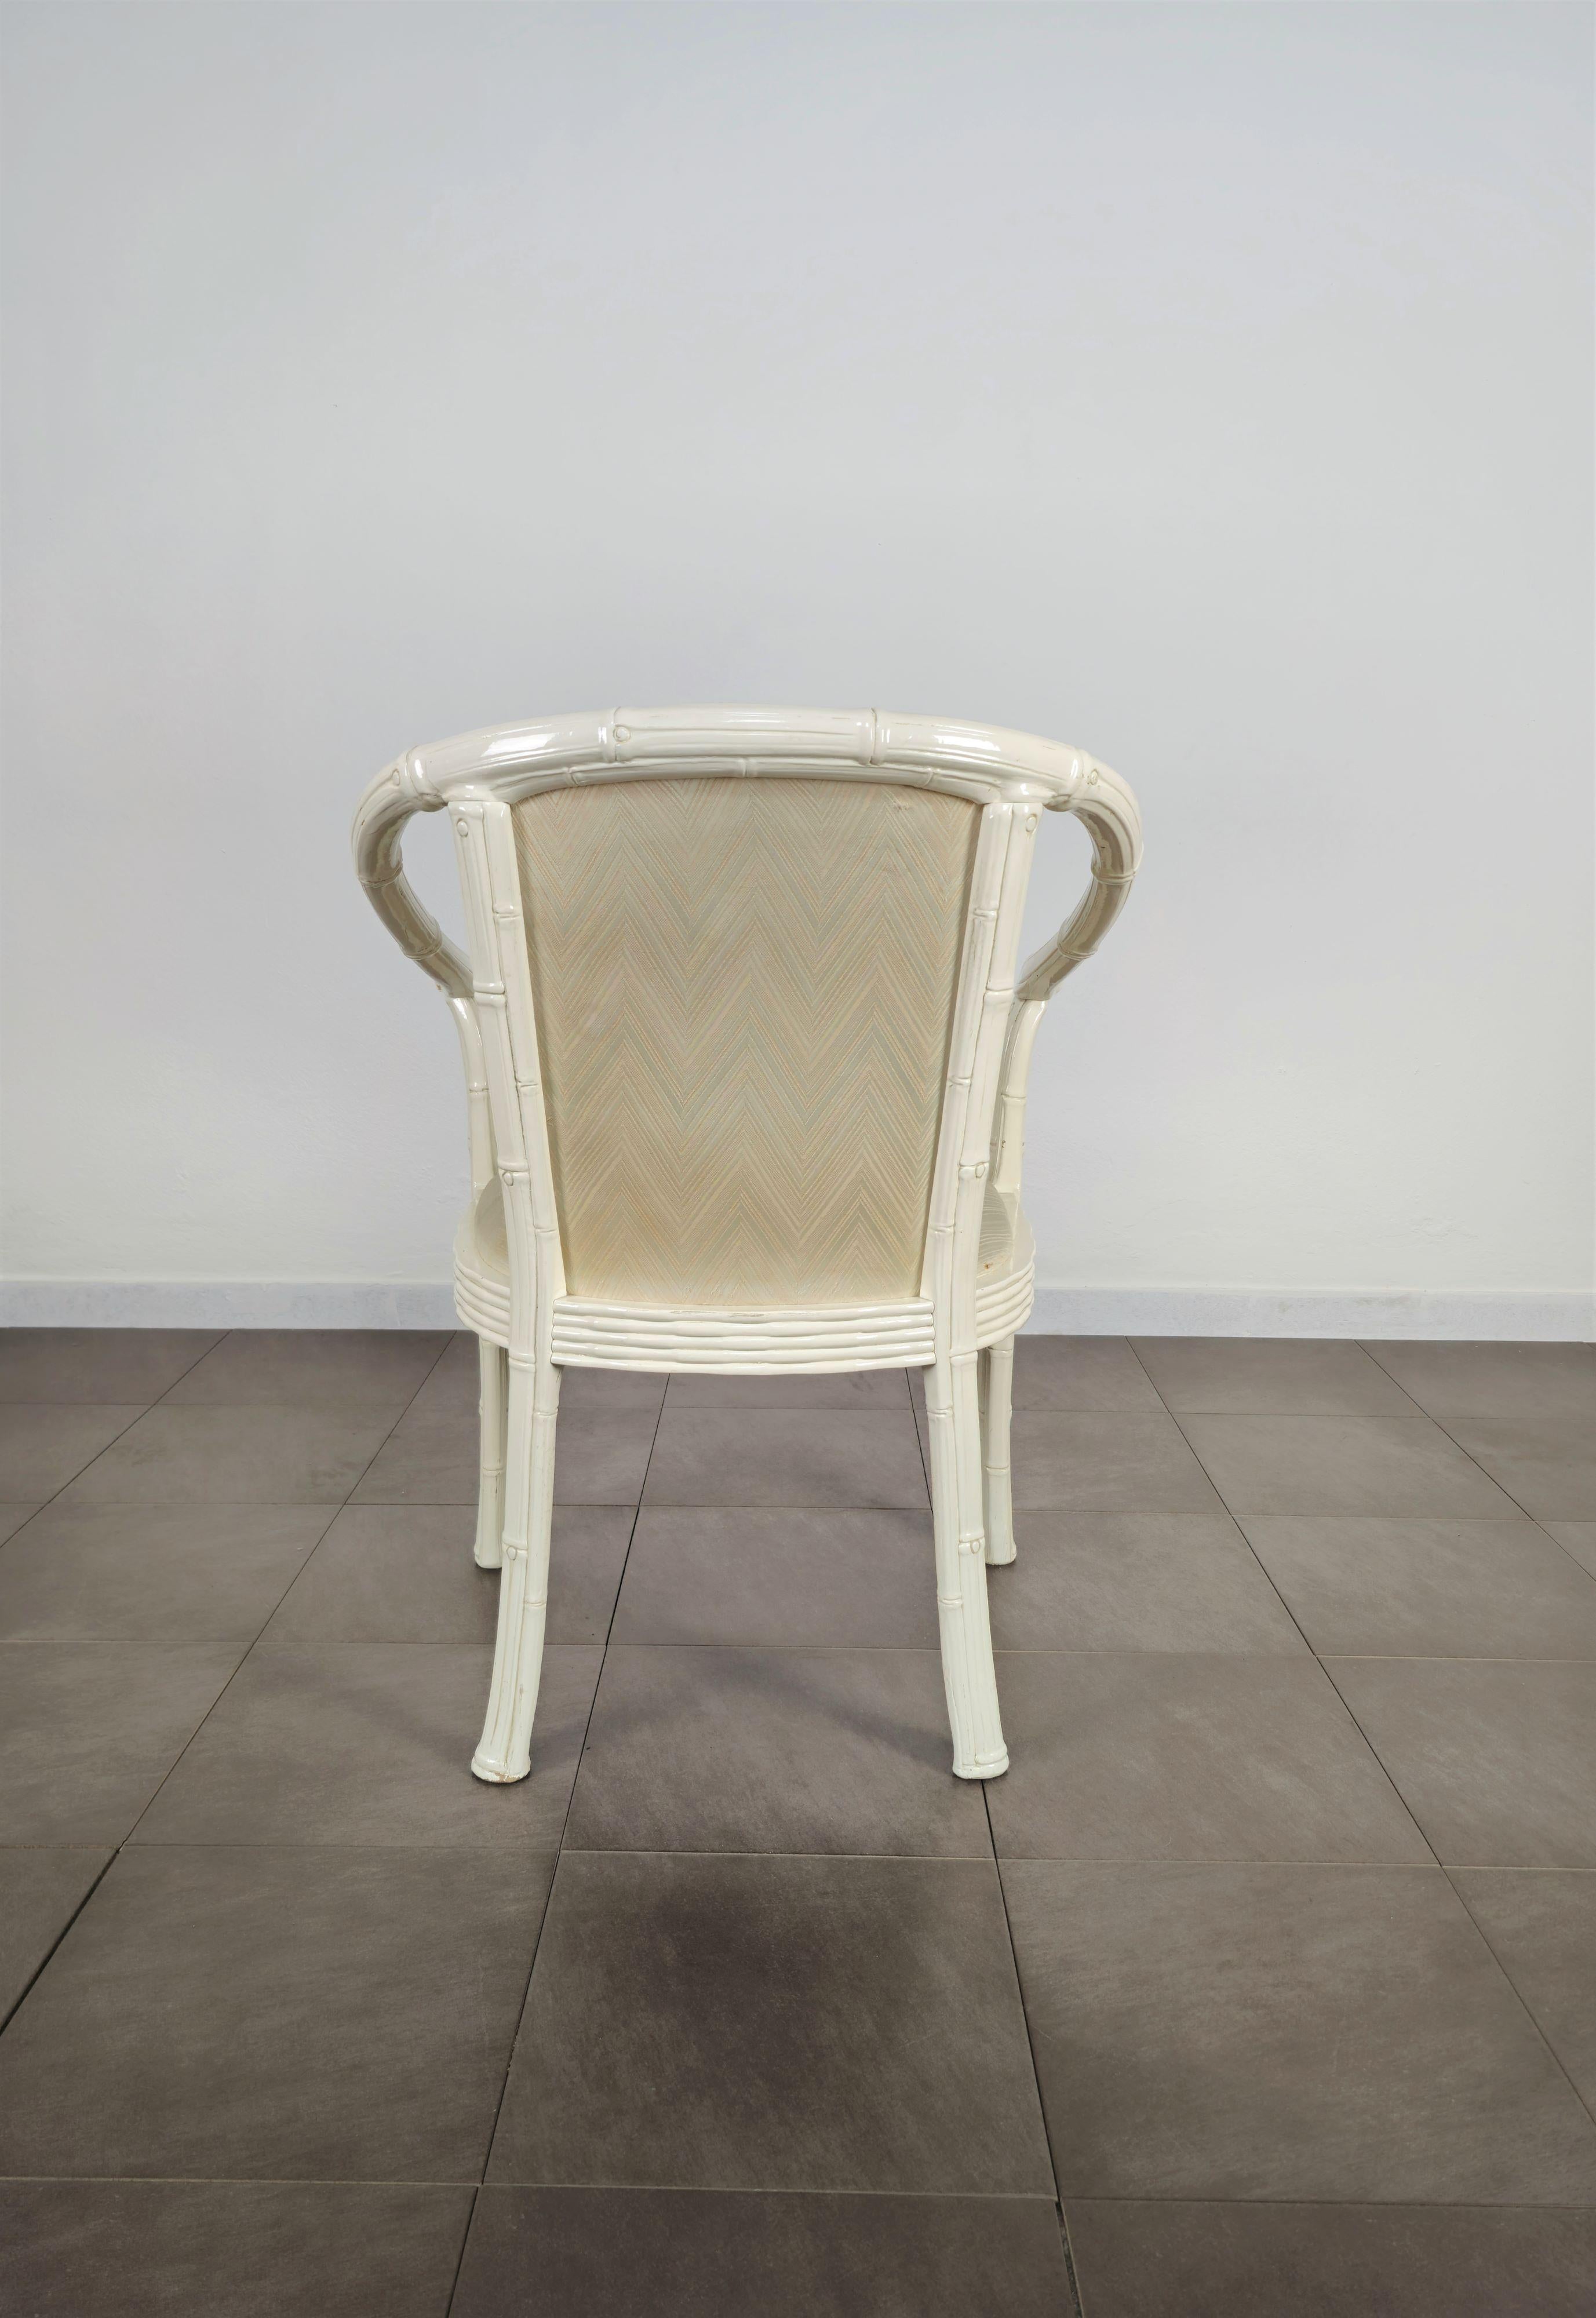 Midcentury Chair White Enamelled Bamboo Fabric Italian Design, 1960s For Sale 2